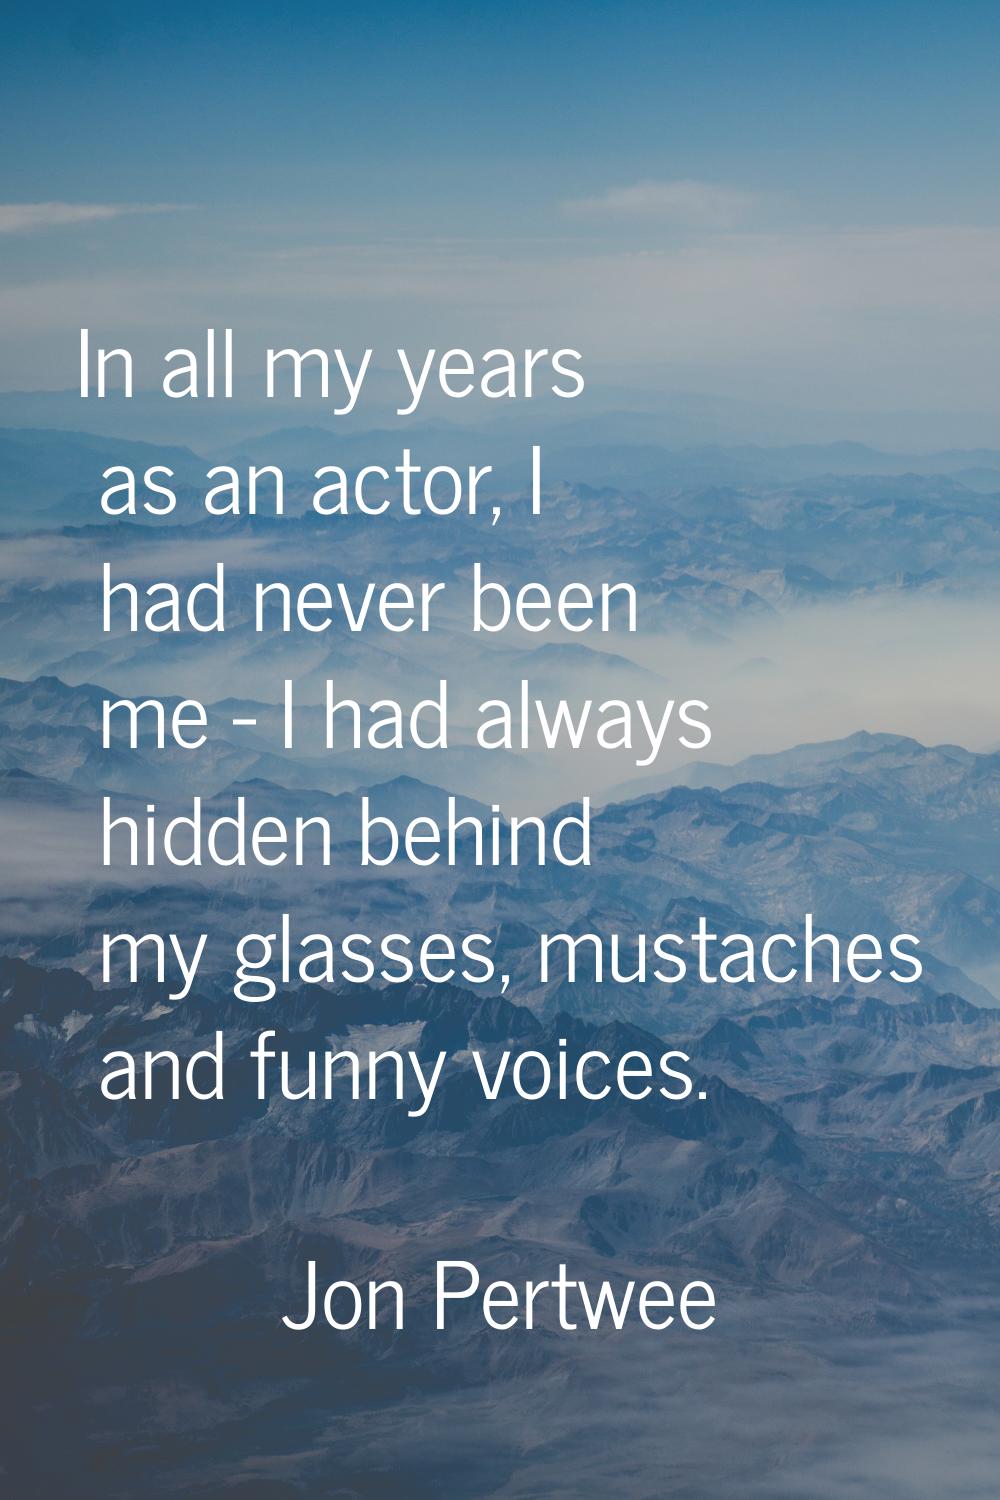 In all my years as an actor, I had never been me - I had always hidden behind my glasses, mustaches